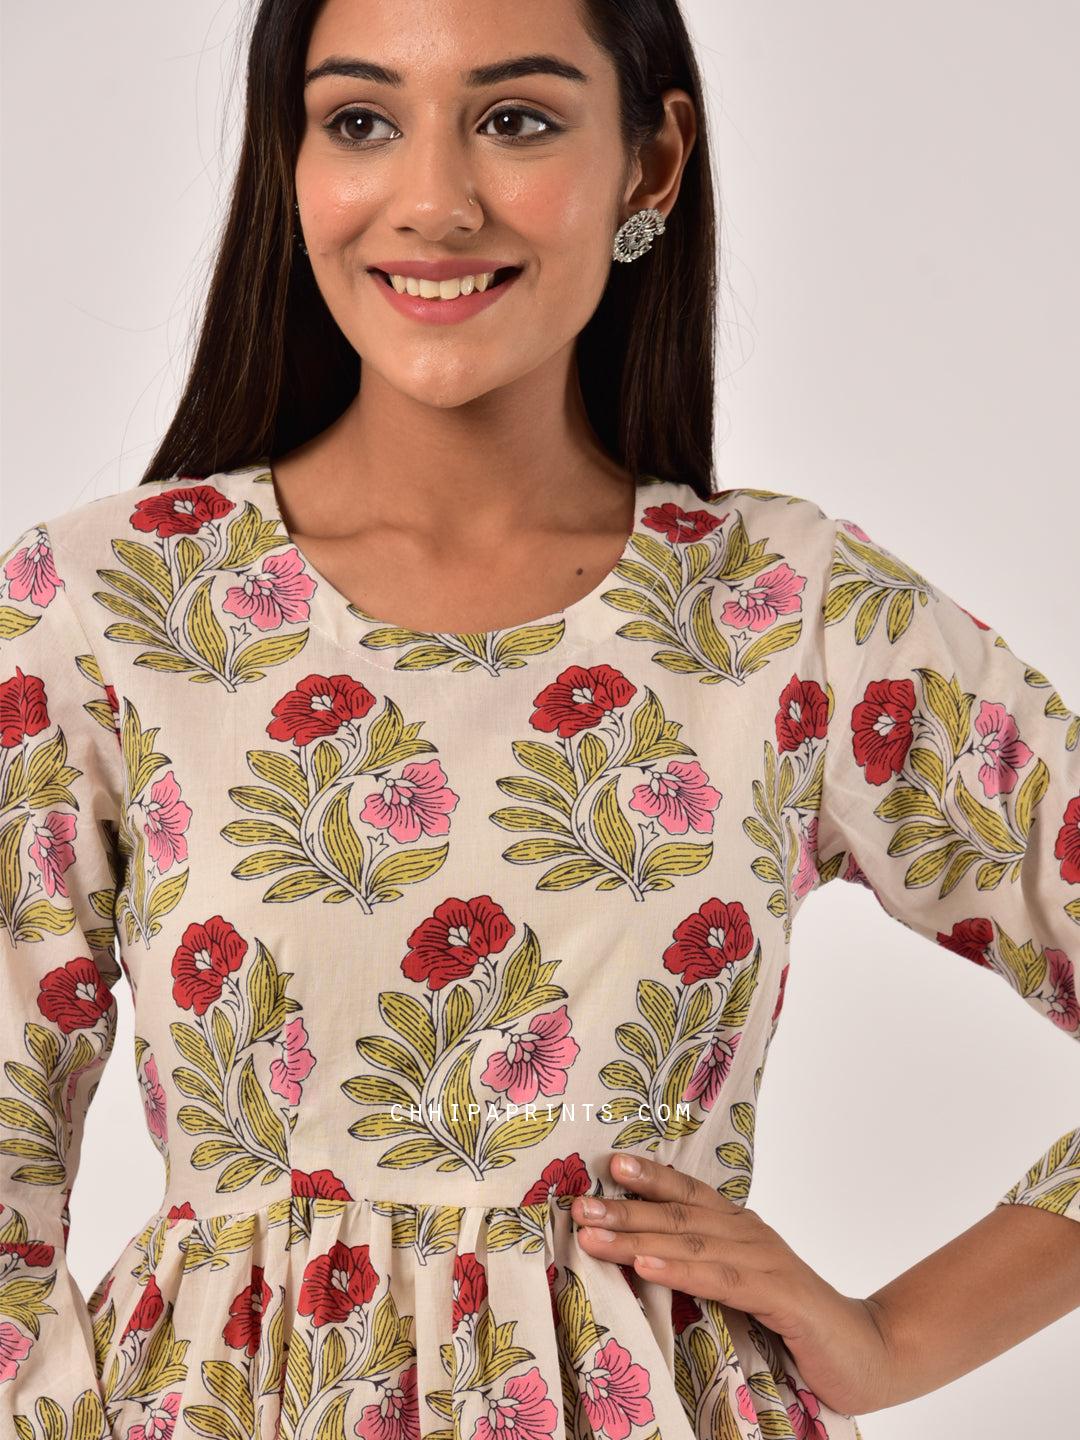 Cotton Buta Print Gather Top in Natural